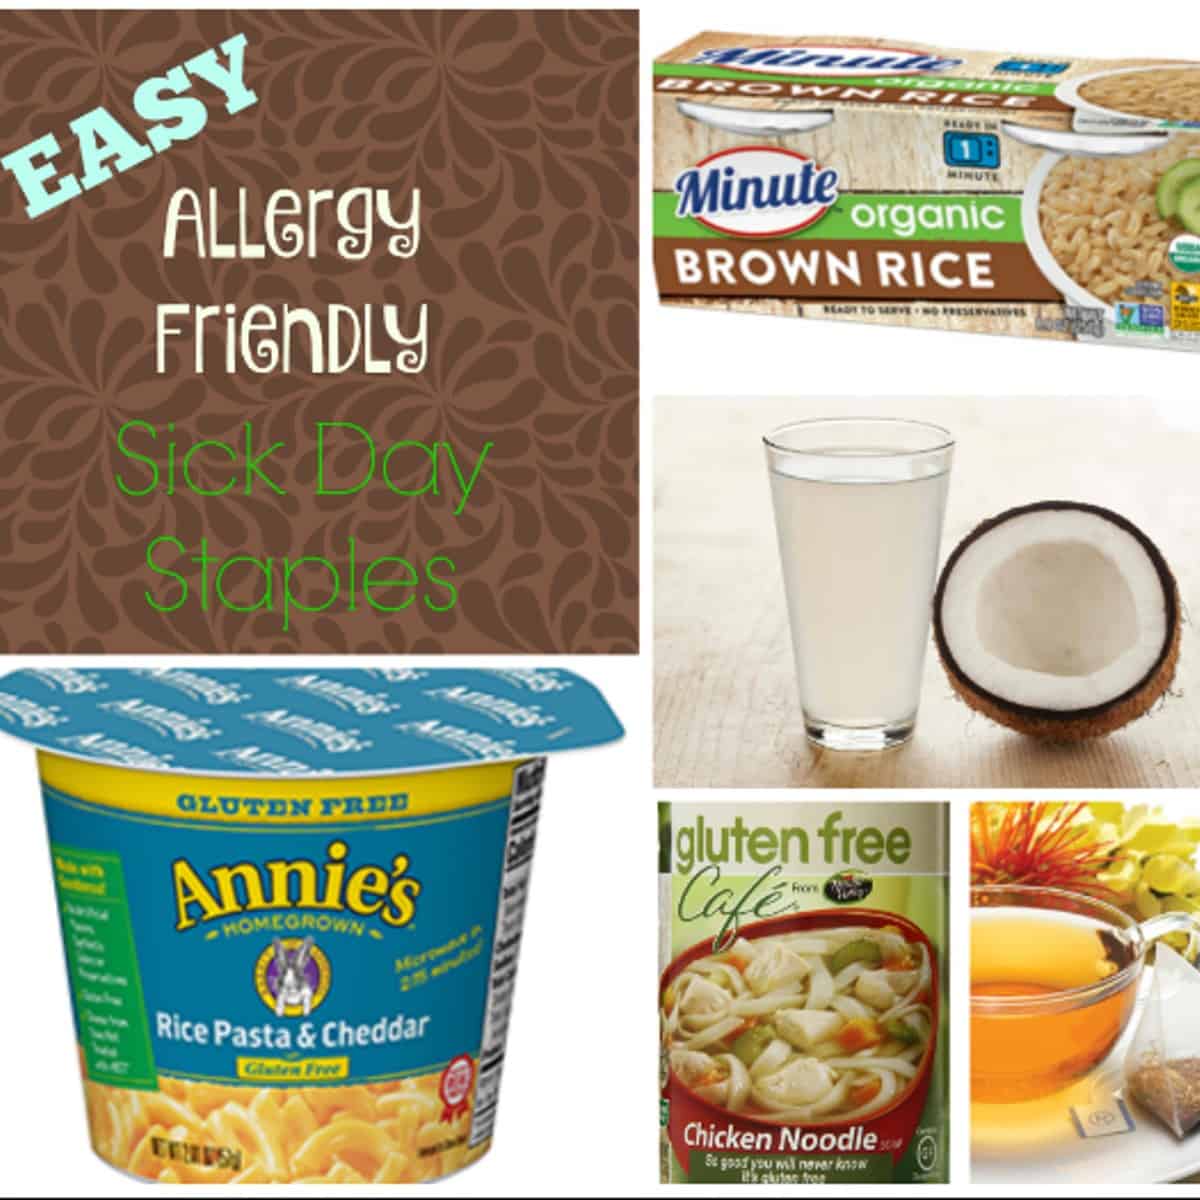 best foods to eat when sick features a variety of allergy friendly foods you can eat with a stomach flu or cold.